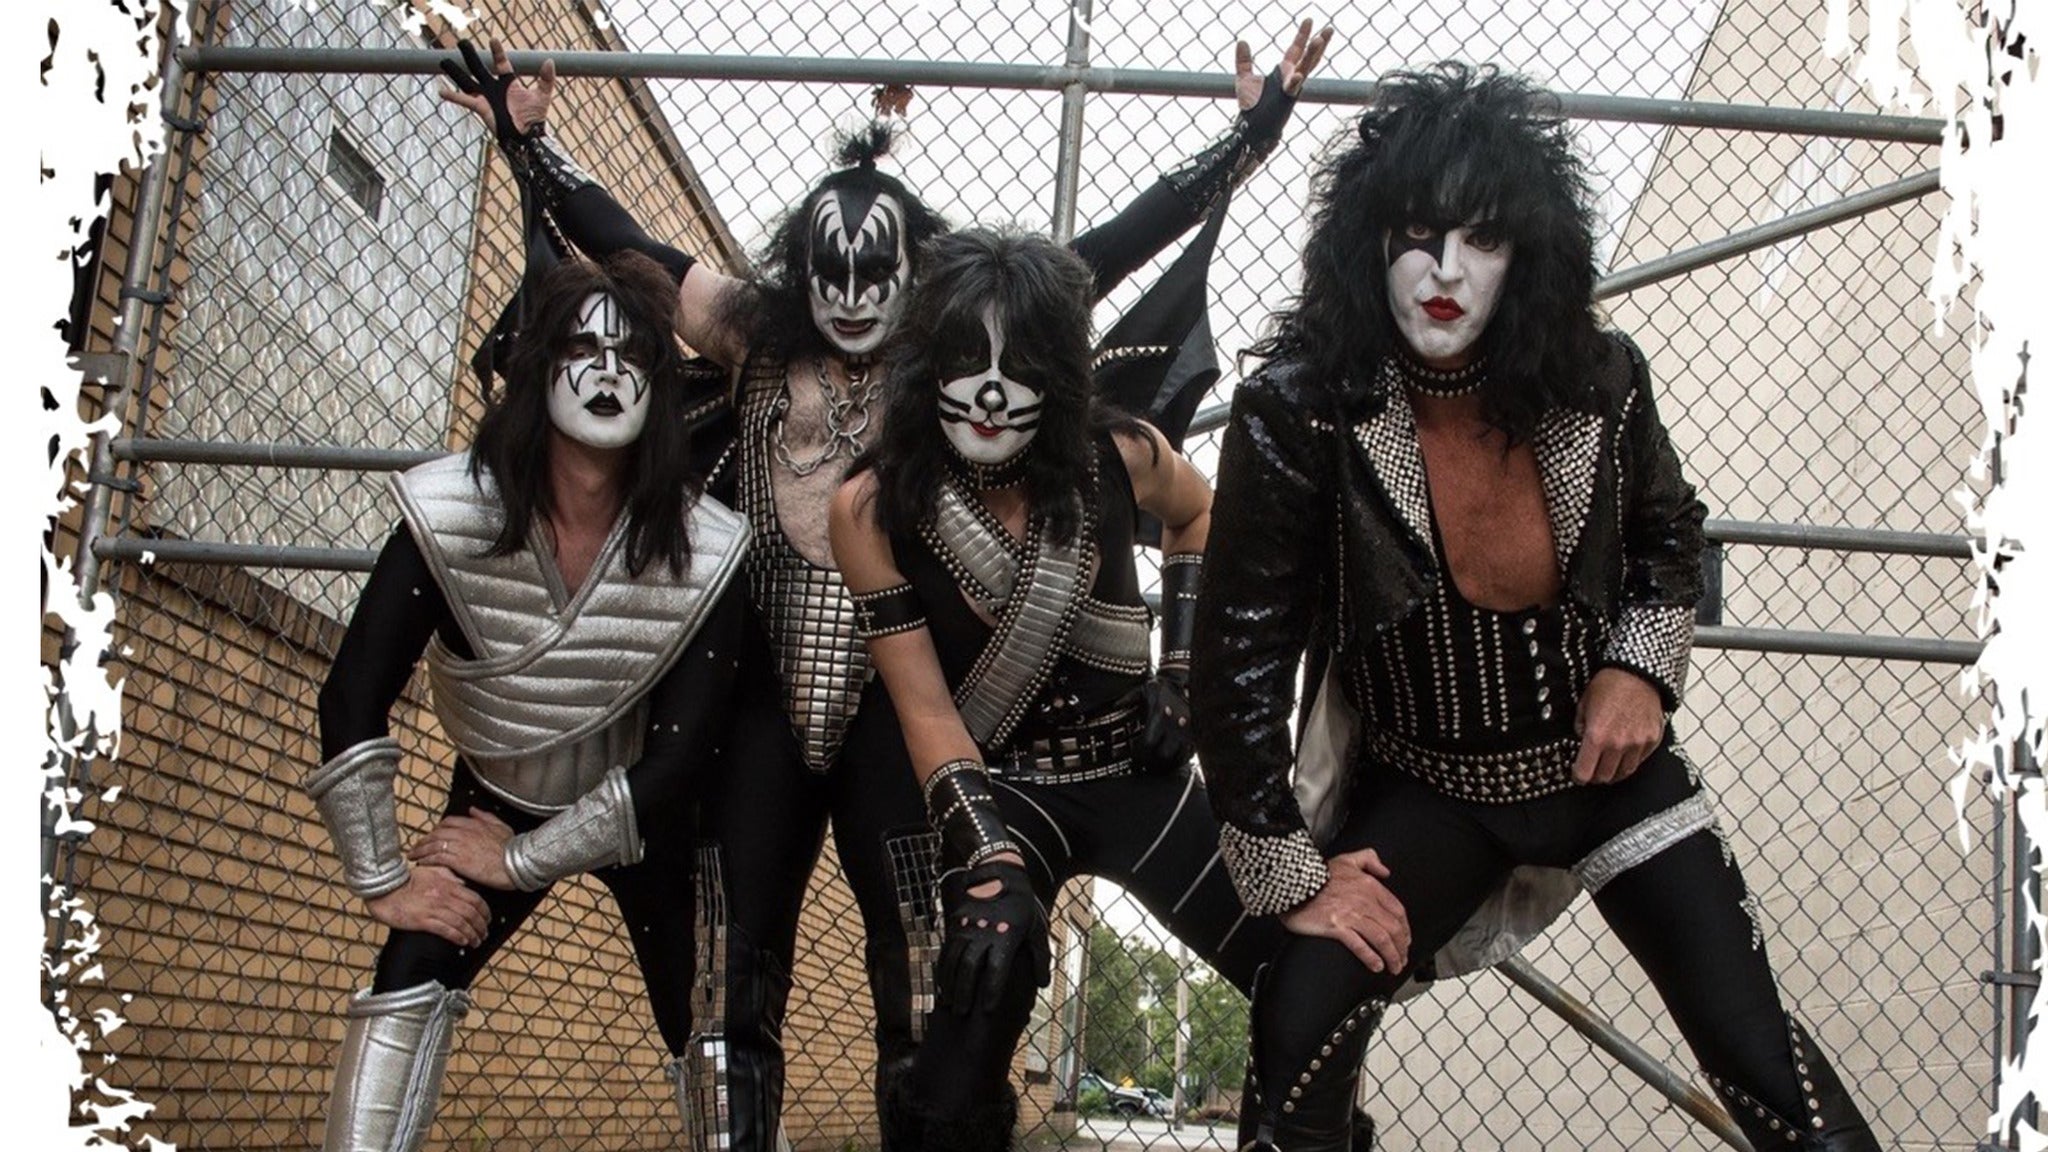 Mr. Speed - A Tribute to Kiss in Cleveland promo photo for Citi® Cardmember presale offer code